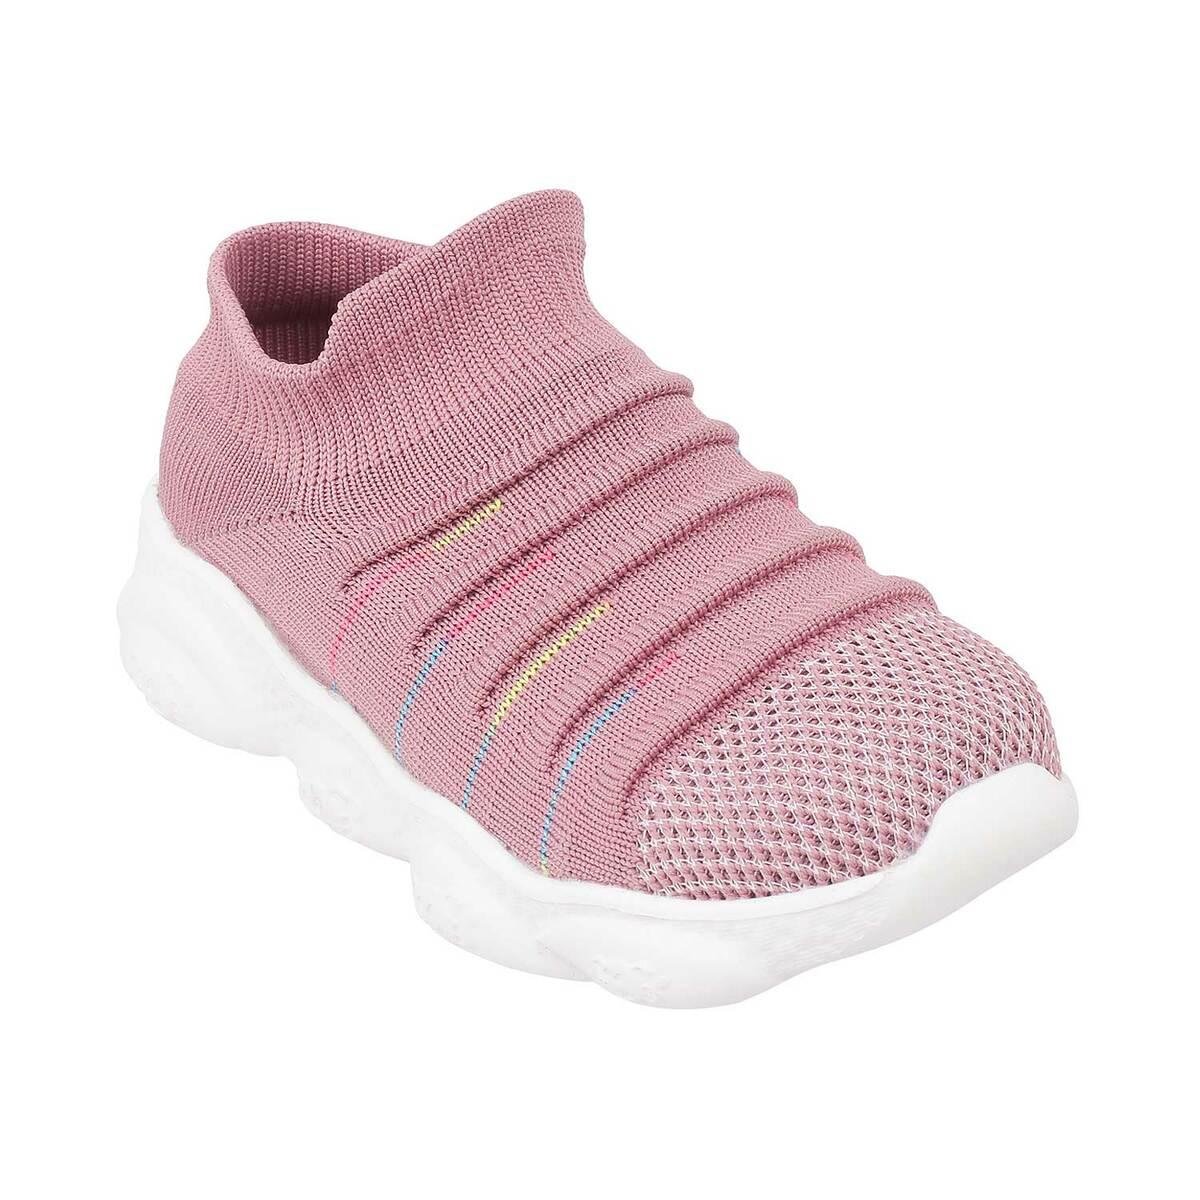 Latest Colourful Girls Casual Sneakers/Sport Shoes For Women's & Girls